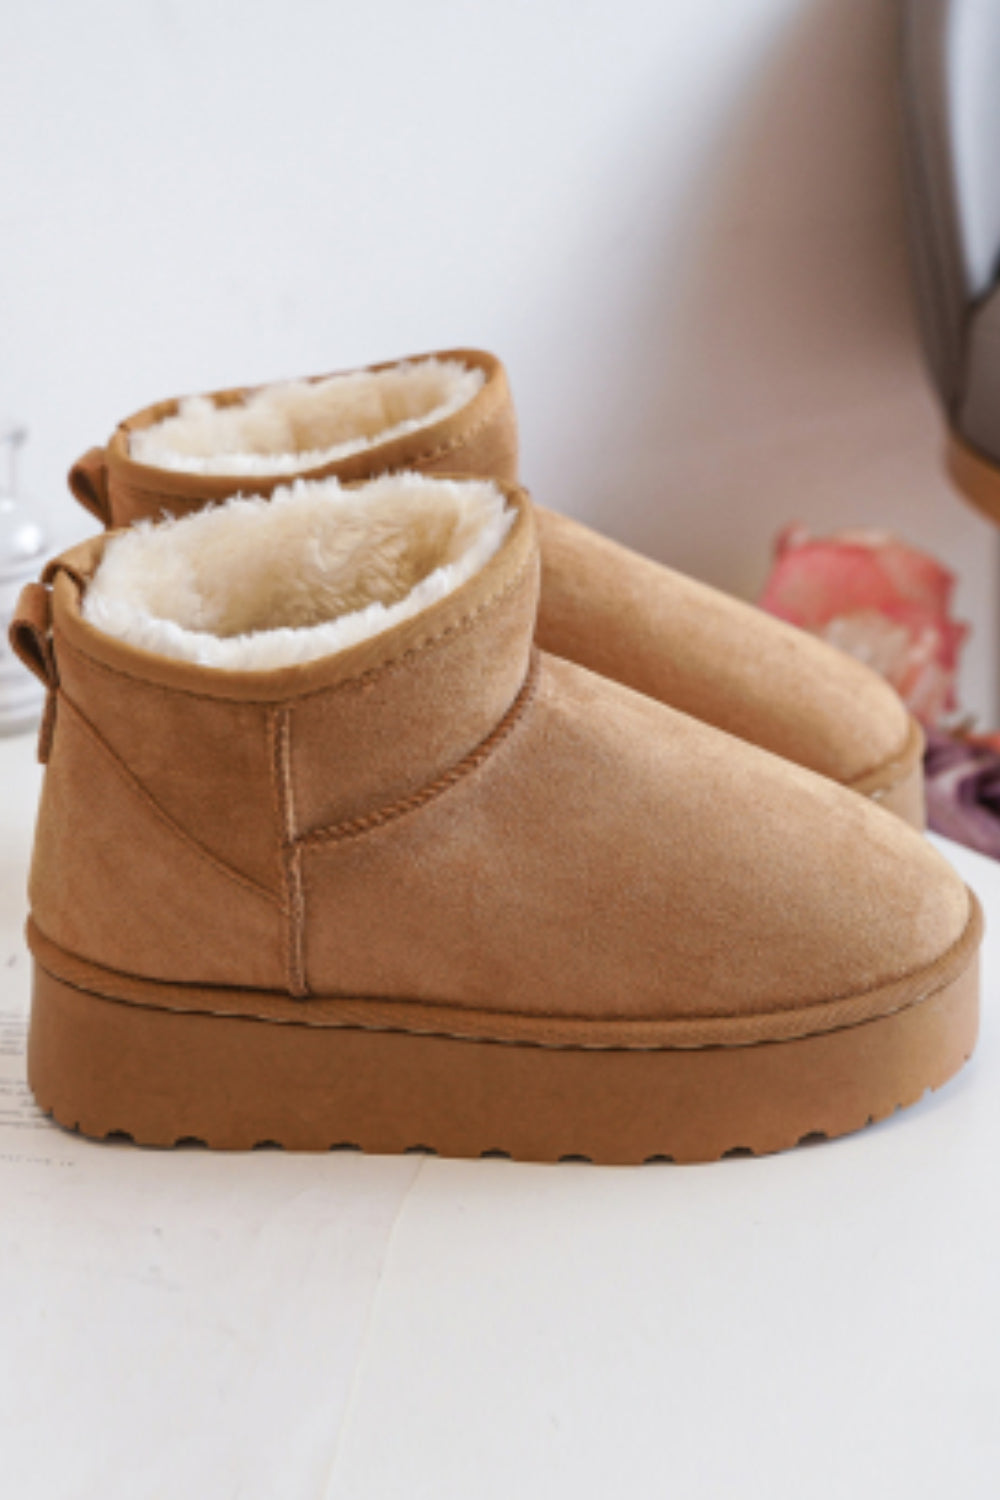 KIDS ANKLE LENGTH FAUX FUR LINING BOOTS IN CAMEL 31-36